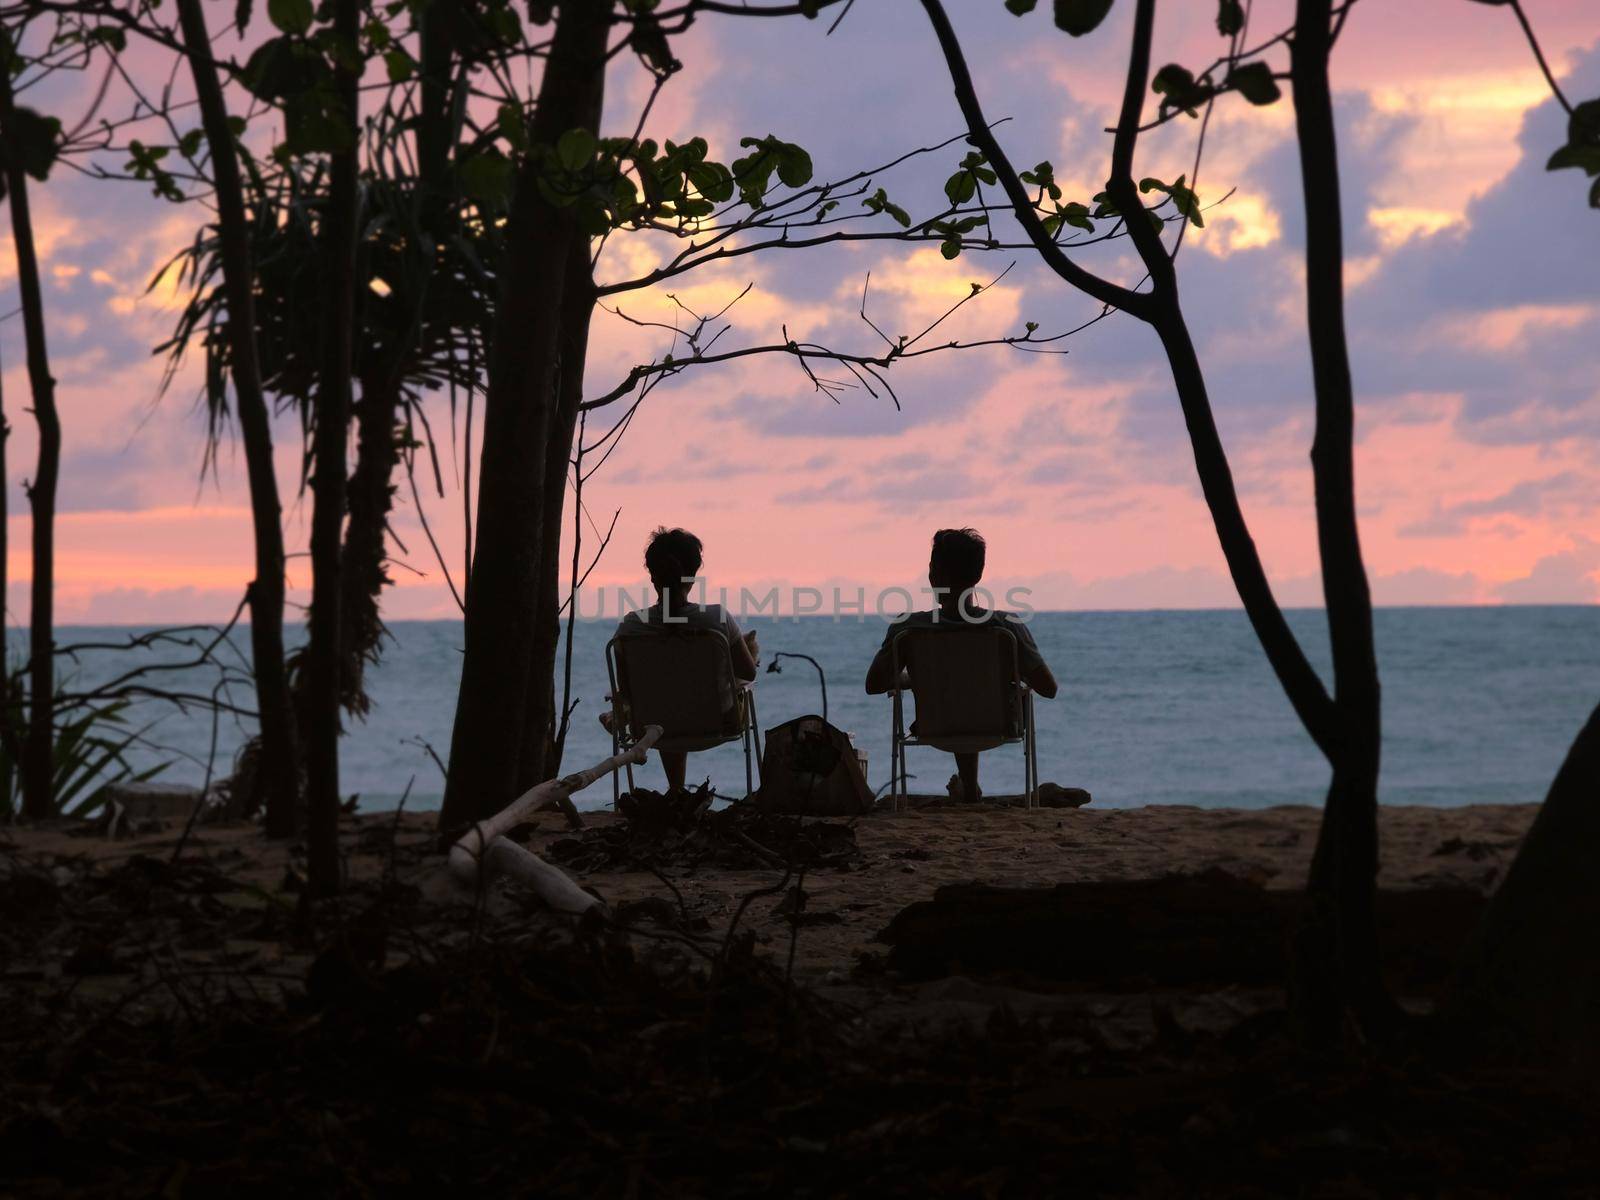 Couples sit and watch the sunset by the sea. Silhouettes of women and men sitting on a bench watching the serene sunset over the ocean. Relaxation and vacation travel concept by TEERASAK